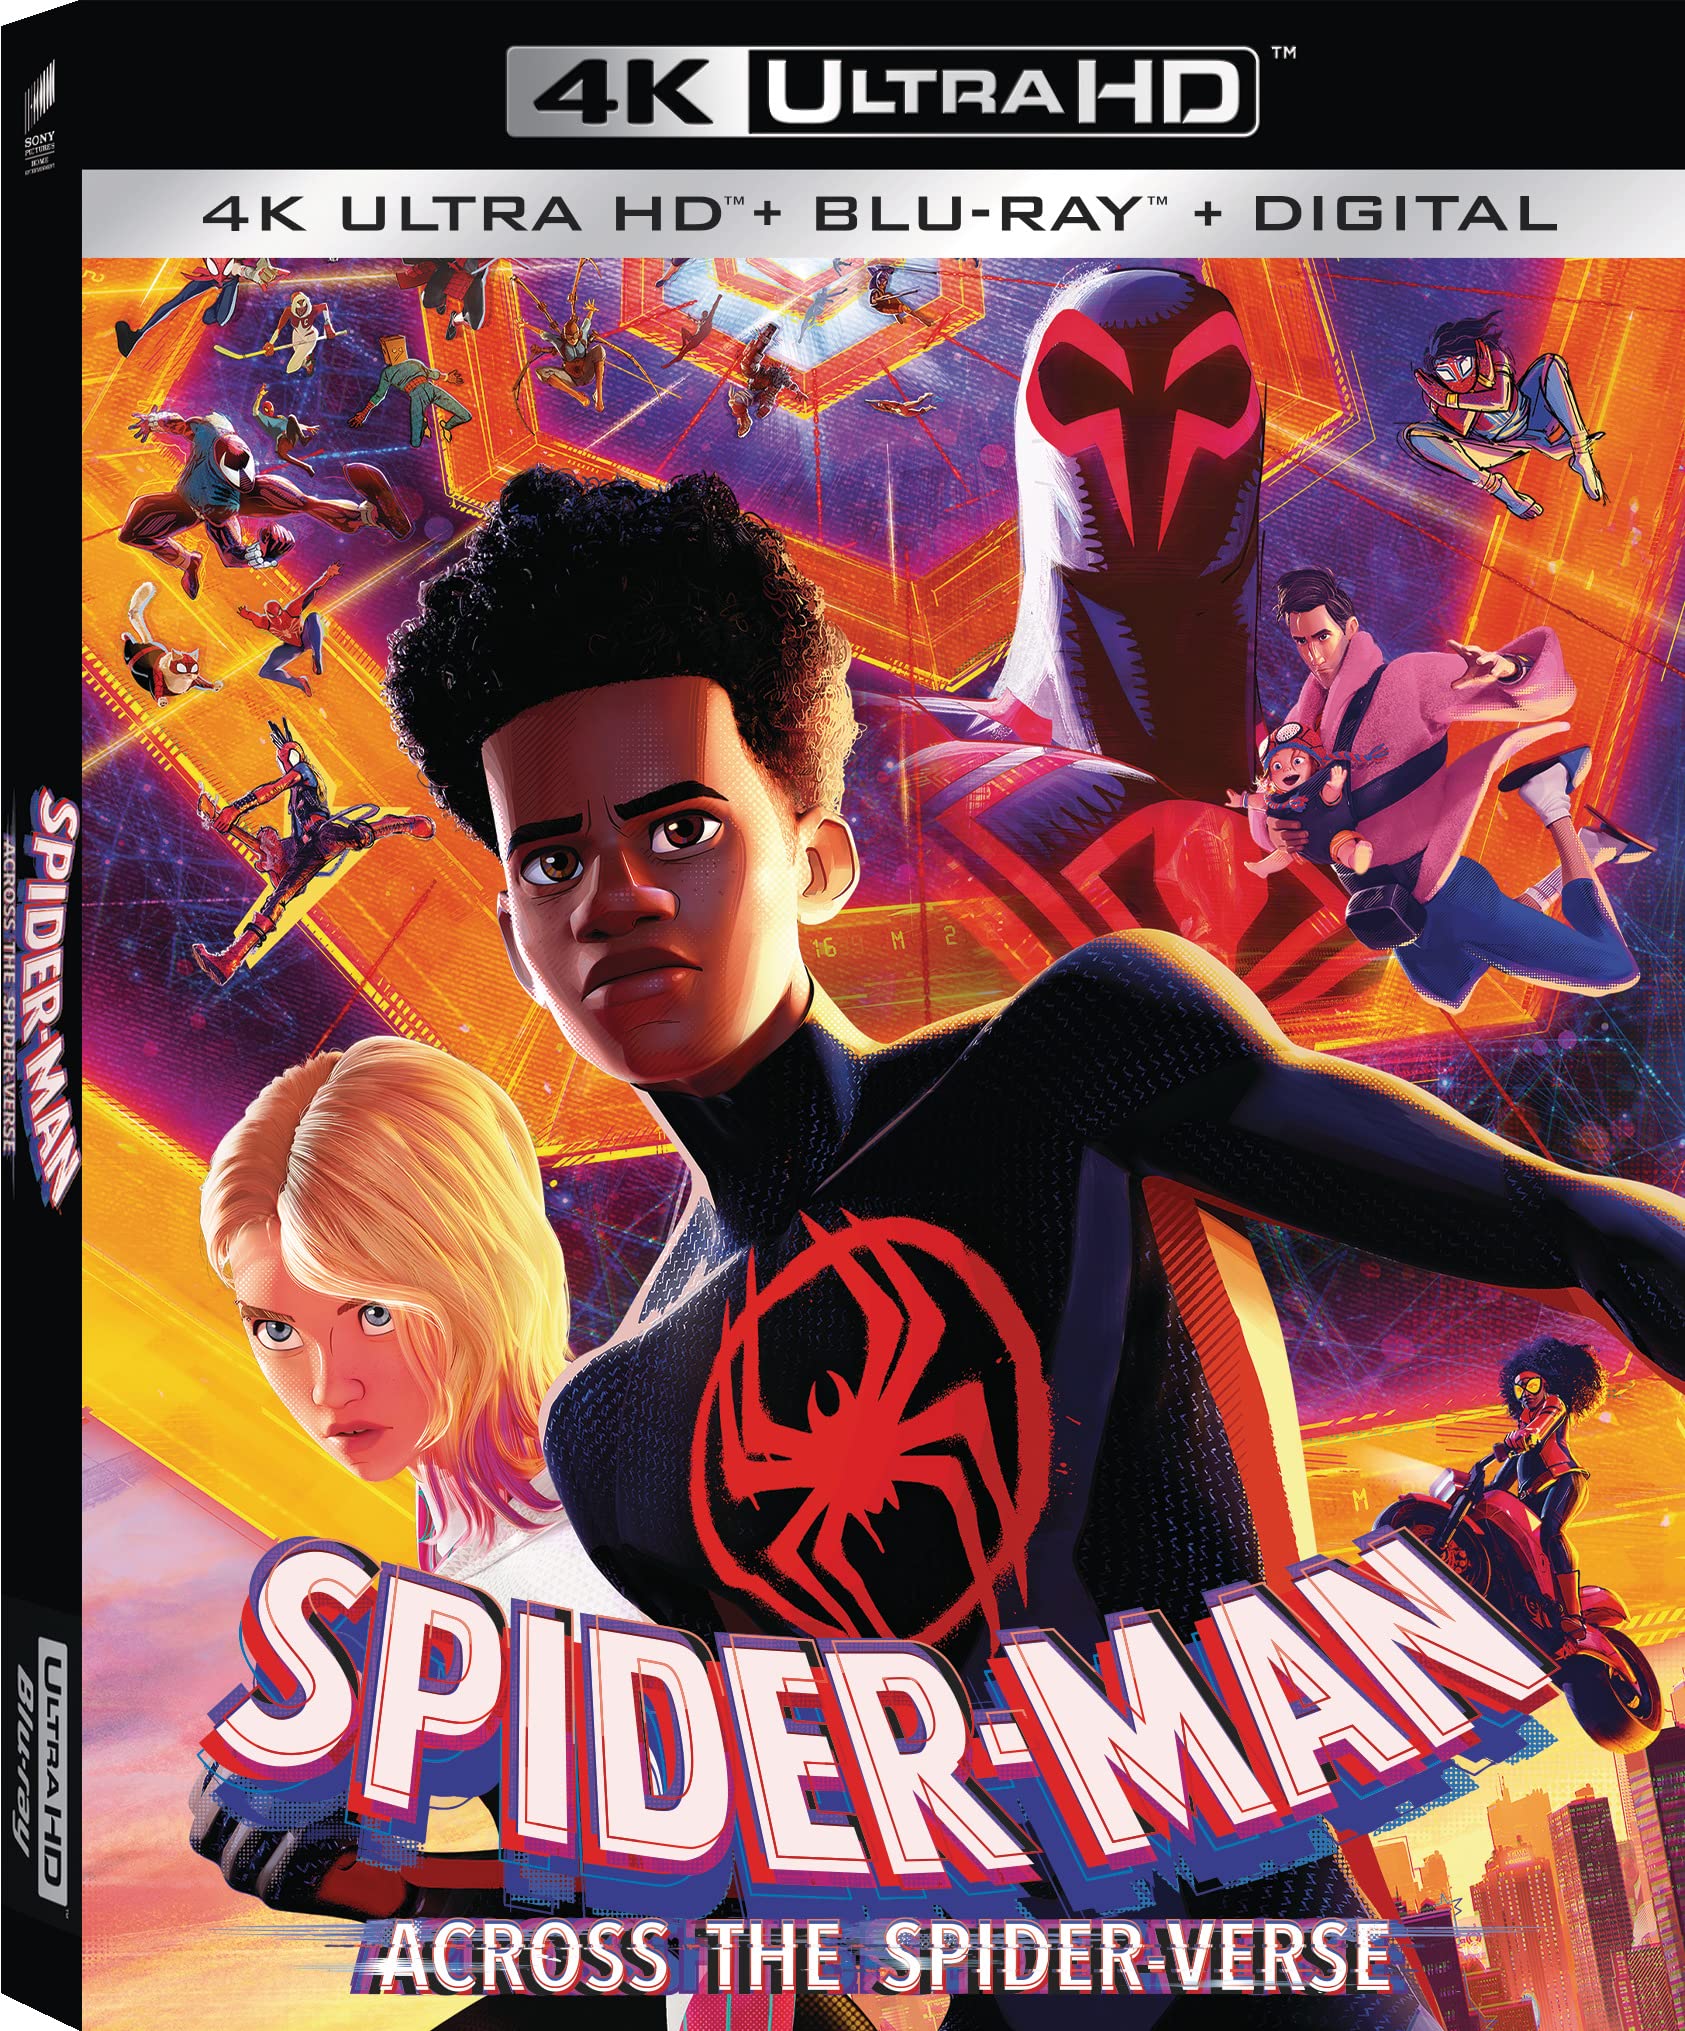 When Is “Spider-Man: Across The Spider-Verse” Coming To Disney+?